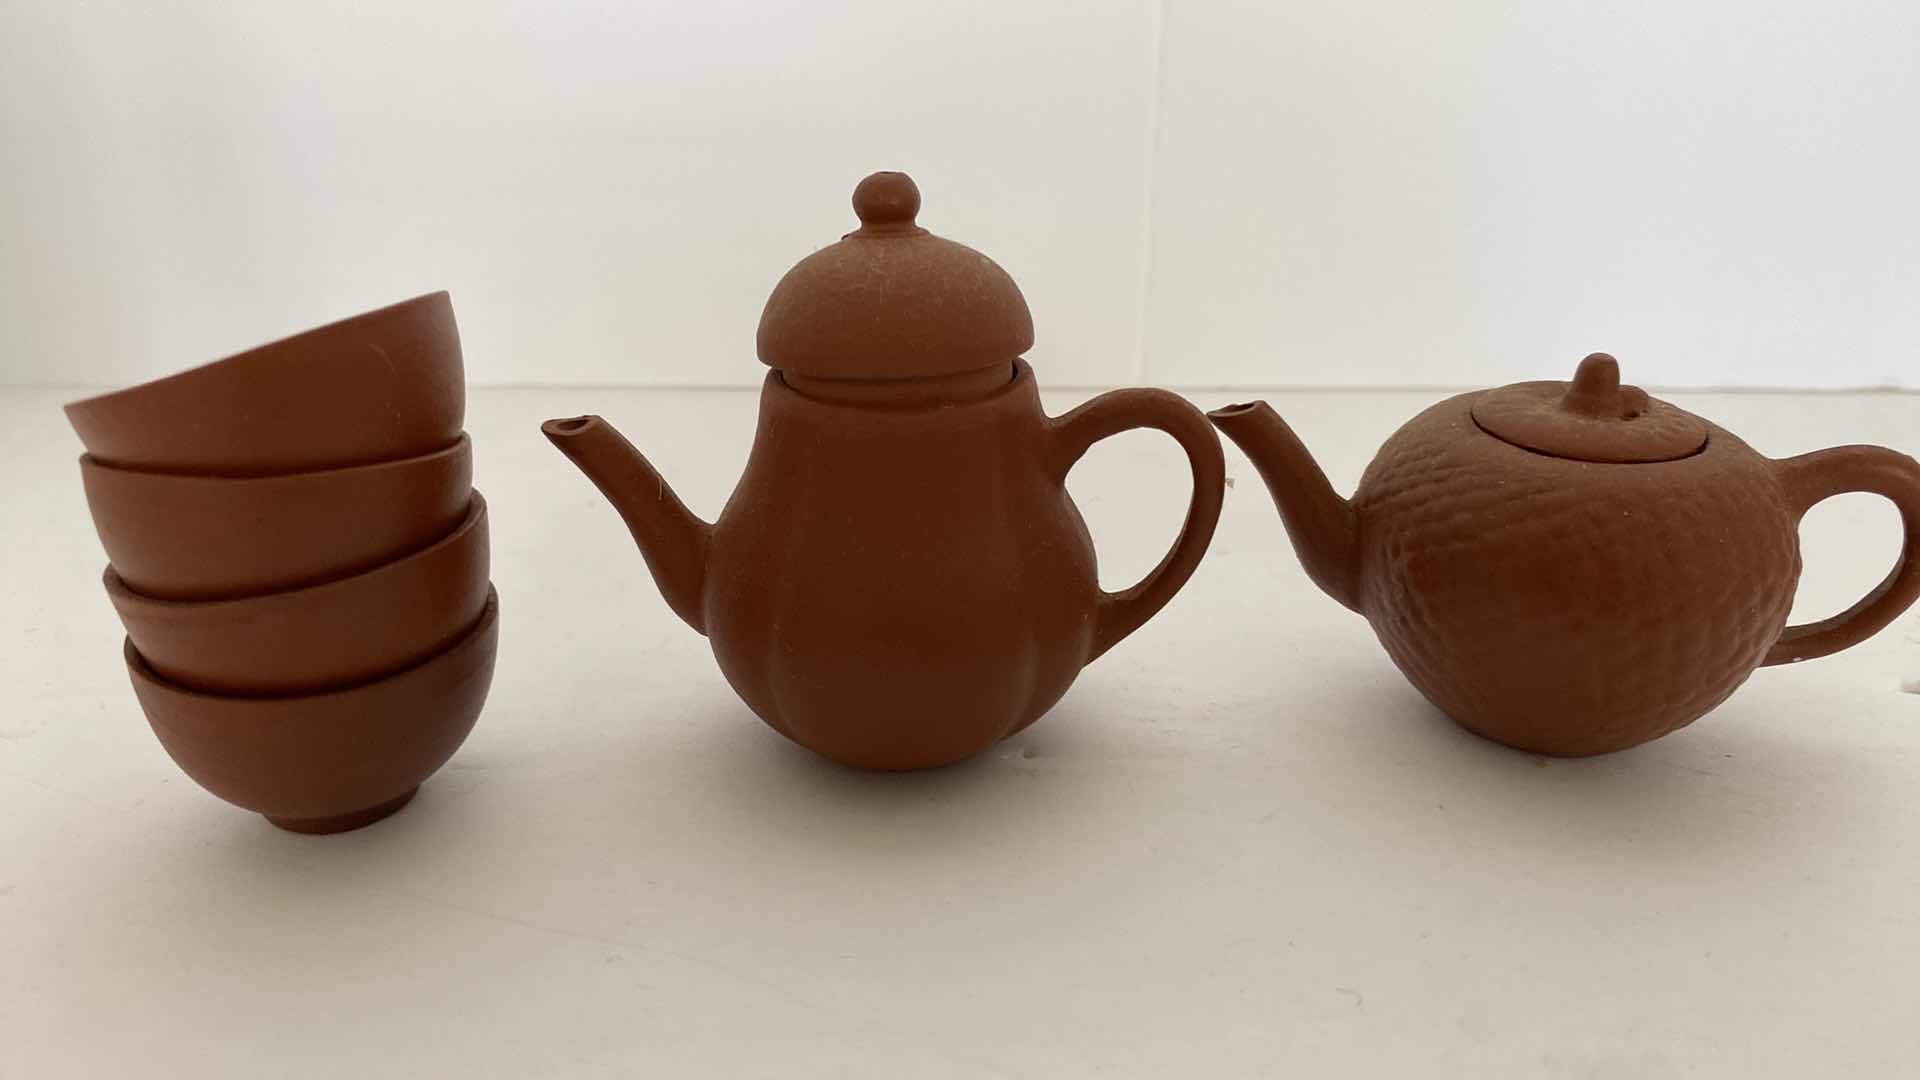 Photo 1 of PAIR OF VINTAGE CHINESE COLLECTIBLE CLAY TEA POTS WITH 4 TEA CUPS LARGEST TEAPOT 3” x 2”